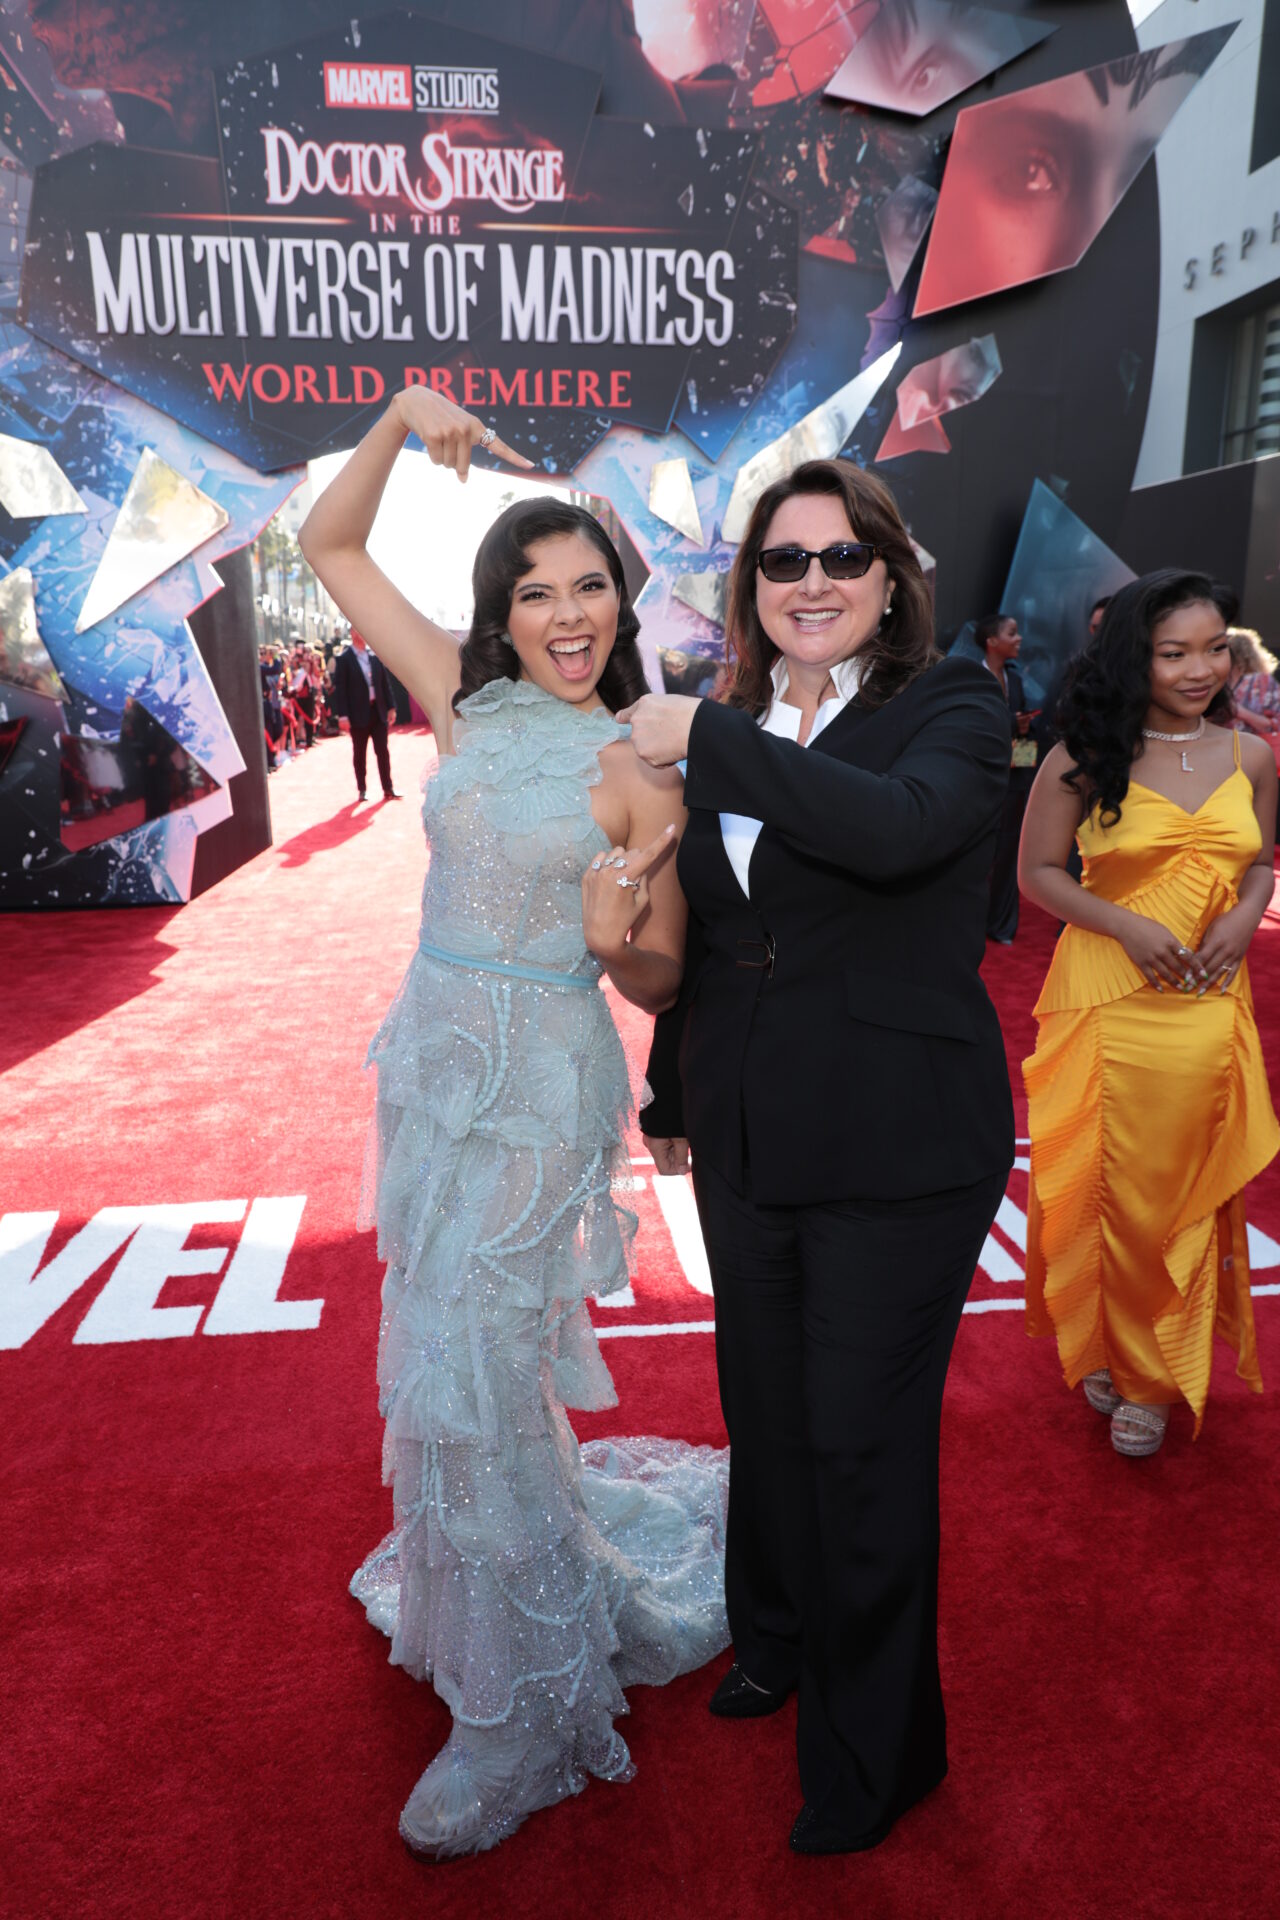 Xochitl Gomez and Executive Producer Victoria Alonso attend the Doctor Strange in the Multiverse of Madness World Premiere at the Dolby Theatre in Hollywood, CA on Monday, May 2, 2022.(photo: Alex J. Berliner/ABImages)